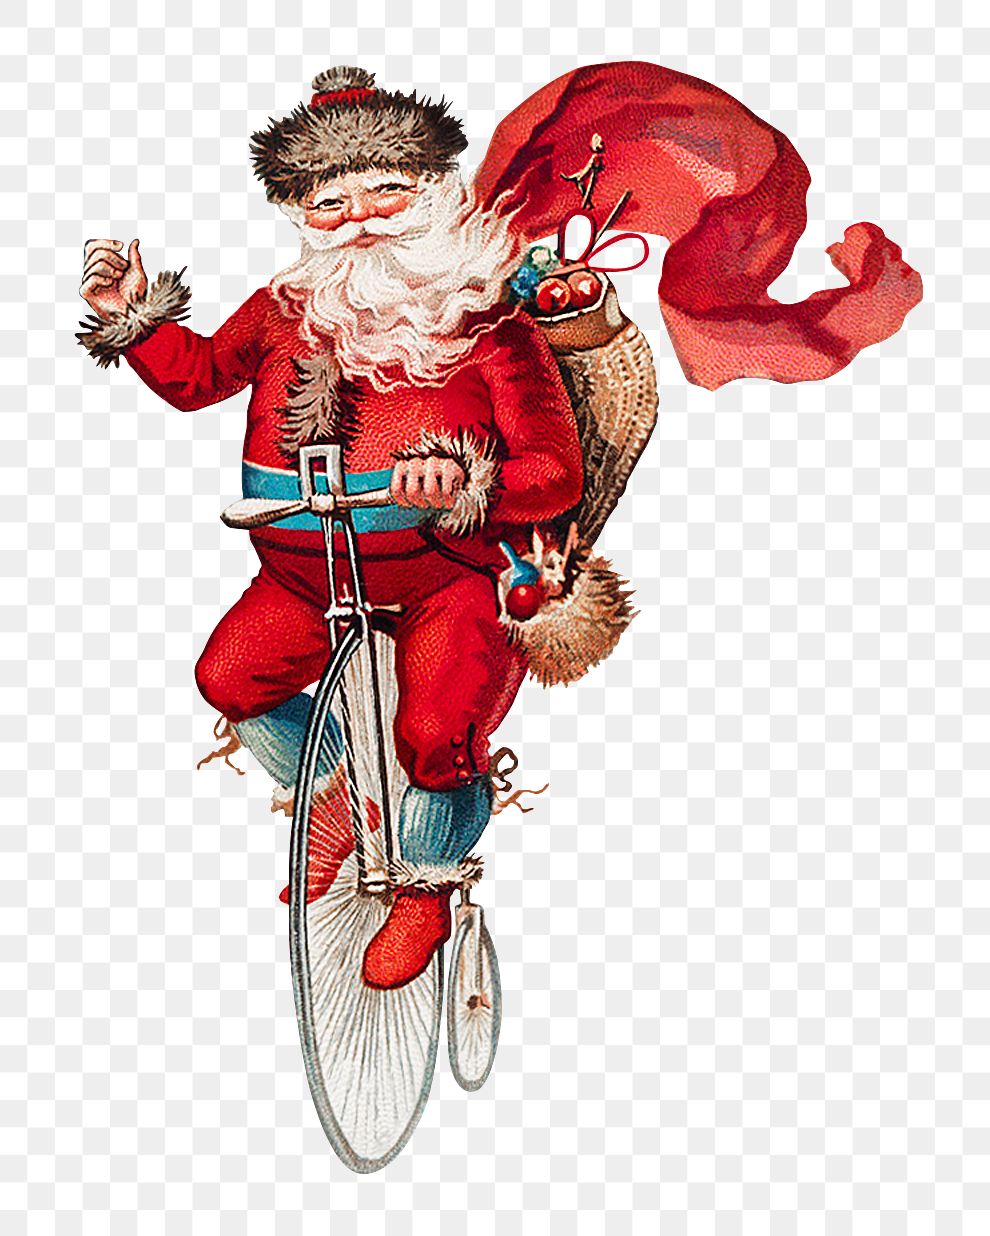 Santa Claus on a penny-farthing sticker transparent png